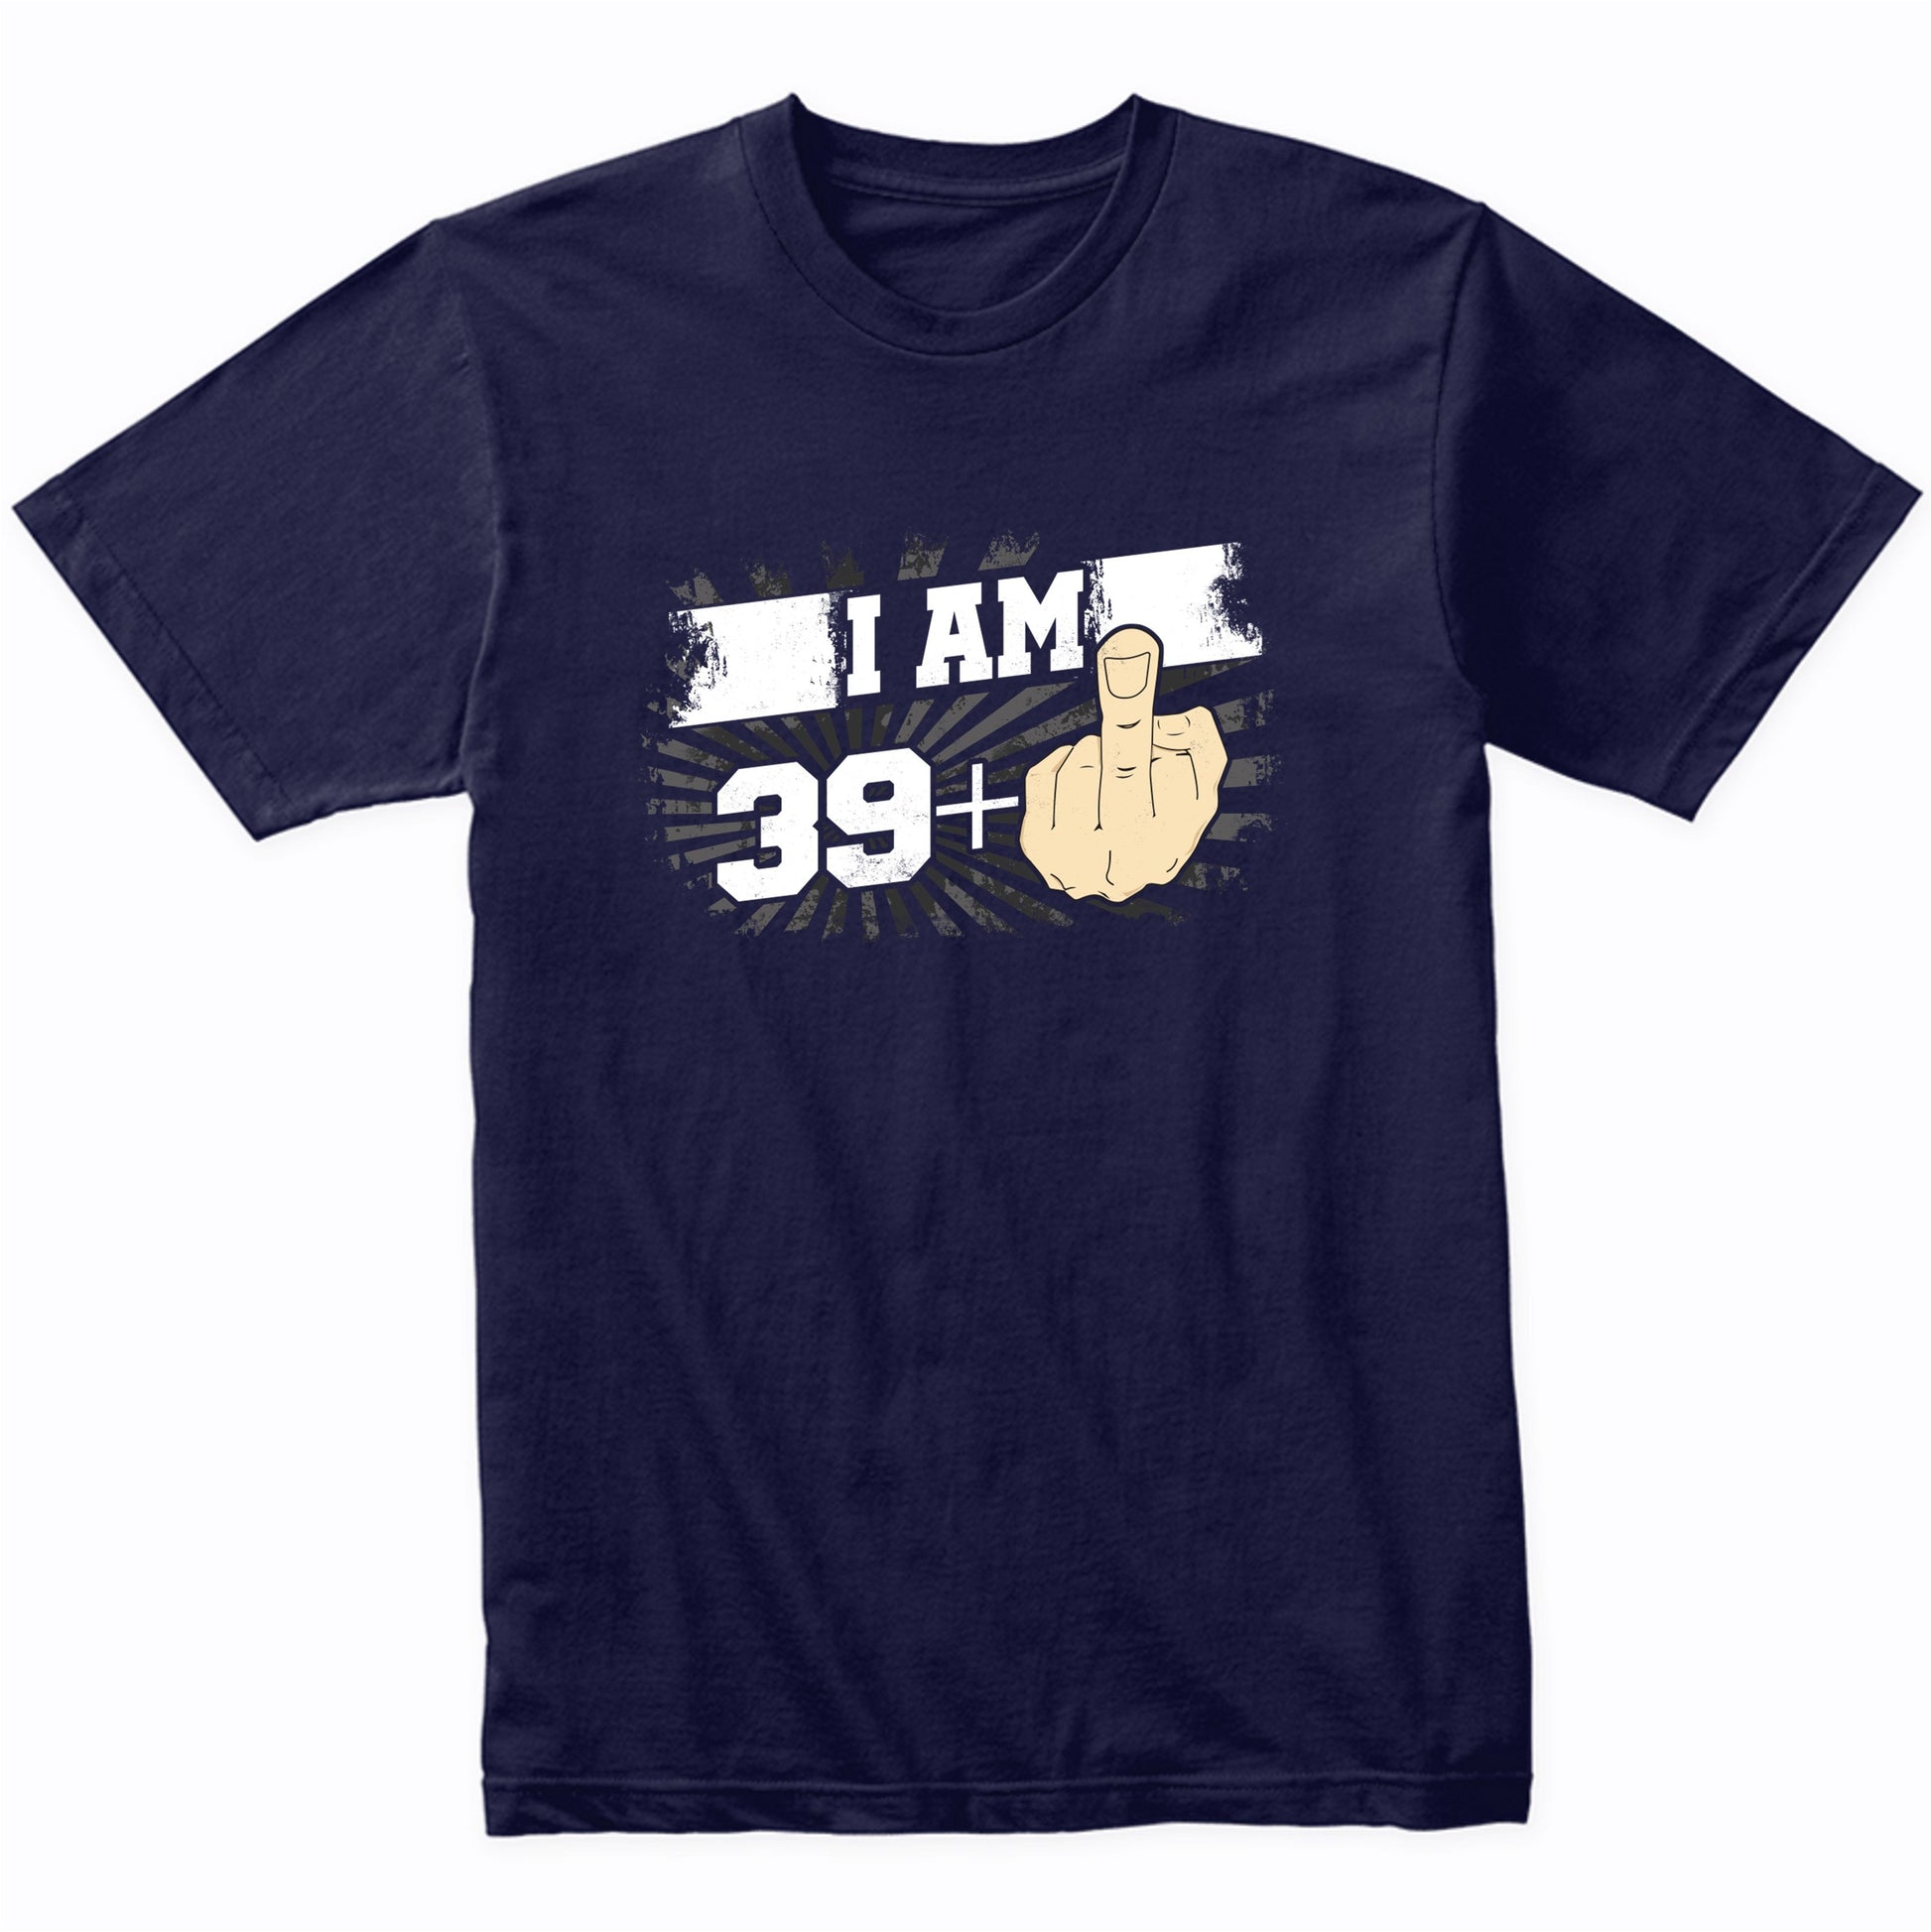 40th Birthday Shirt For Men - I Am 39 Plus Middle Finger 40 Years Old T-Shirt